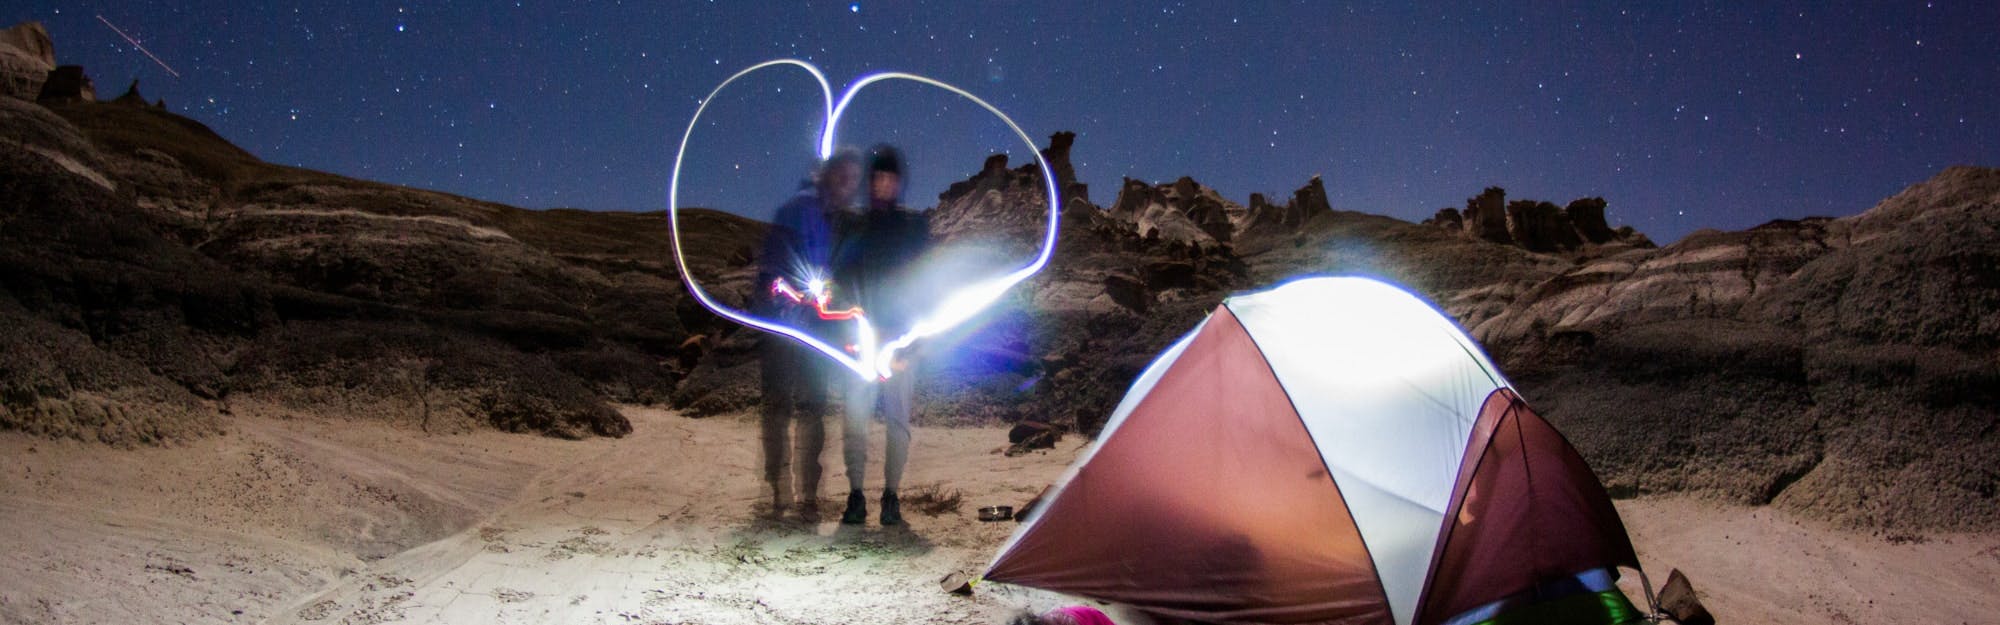 Two people standing together near a tent. There is a lit up heart around them. There is a desert landscape barely visible in the background.